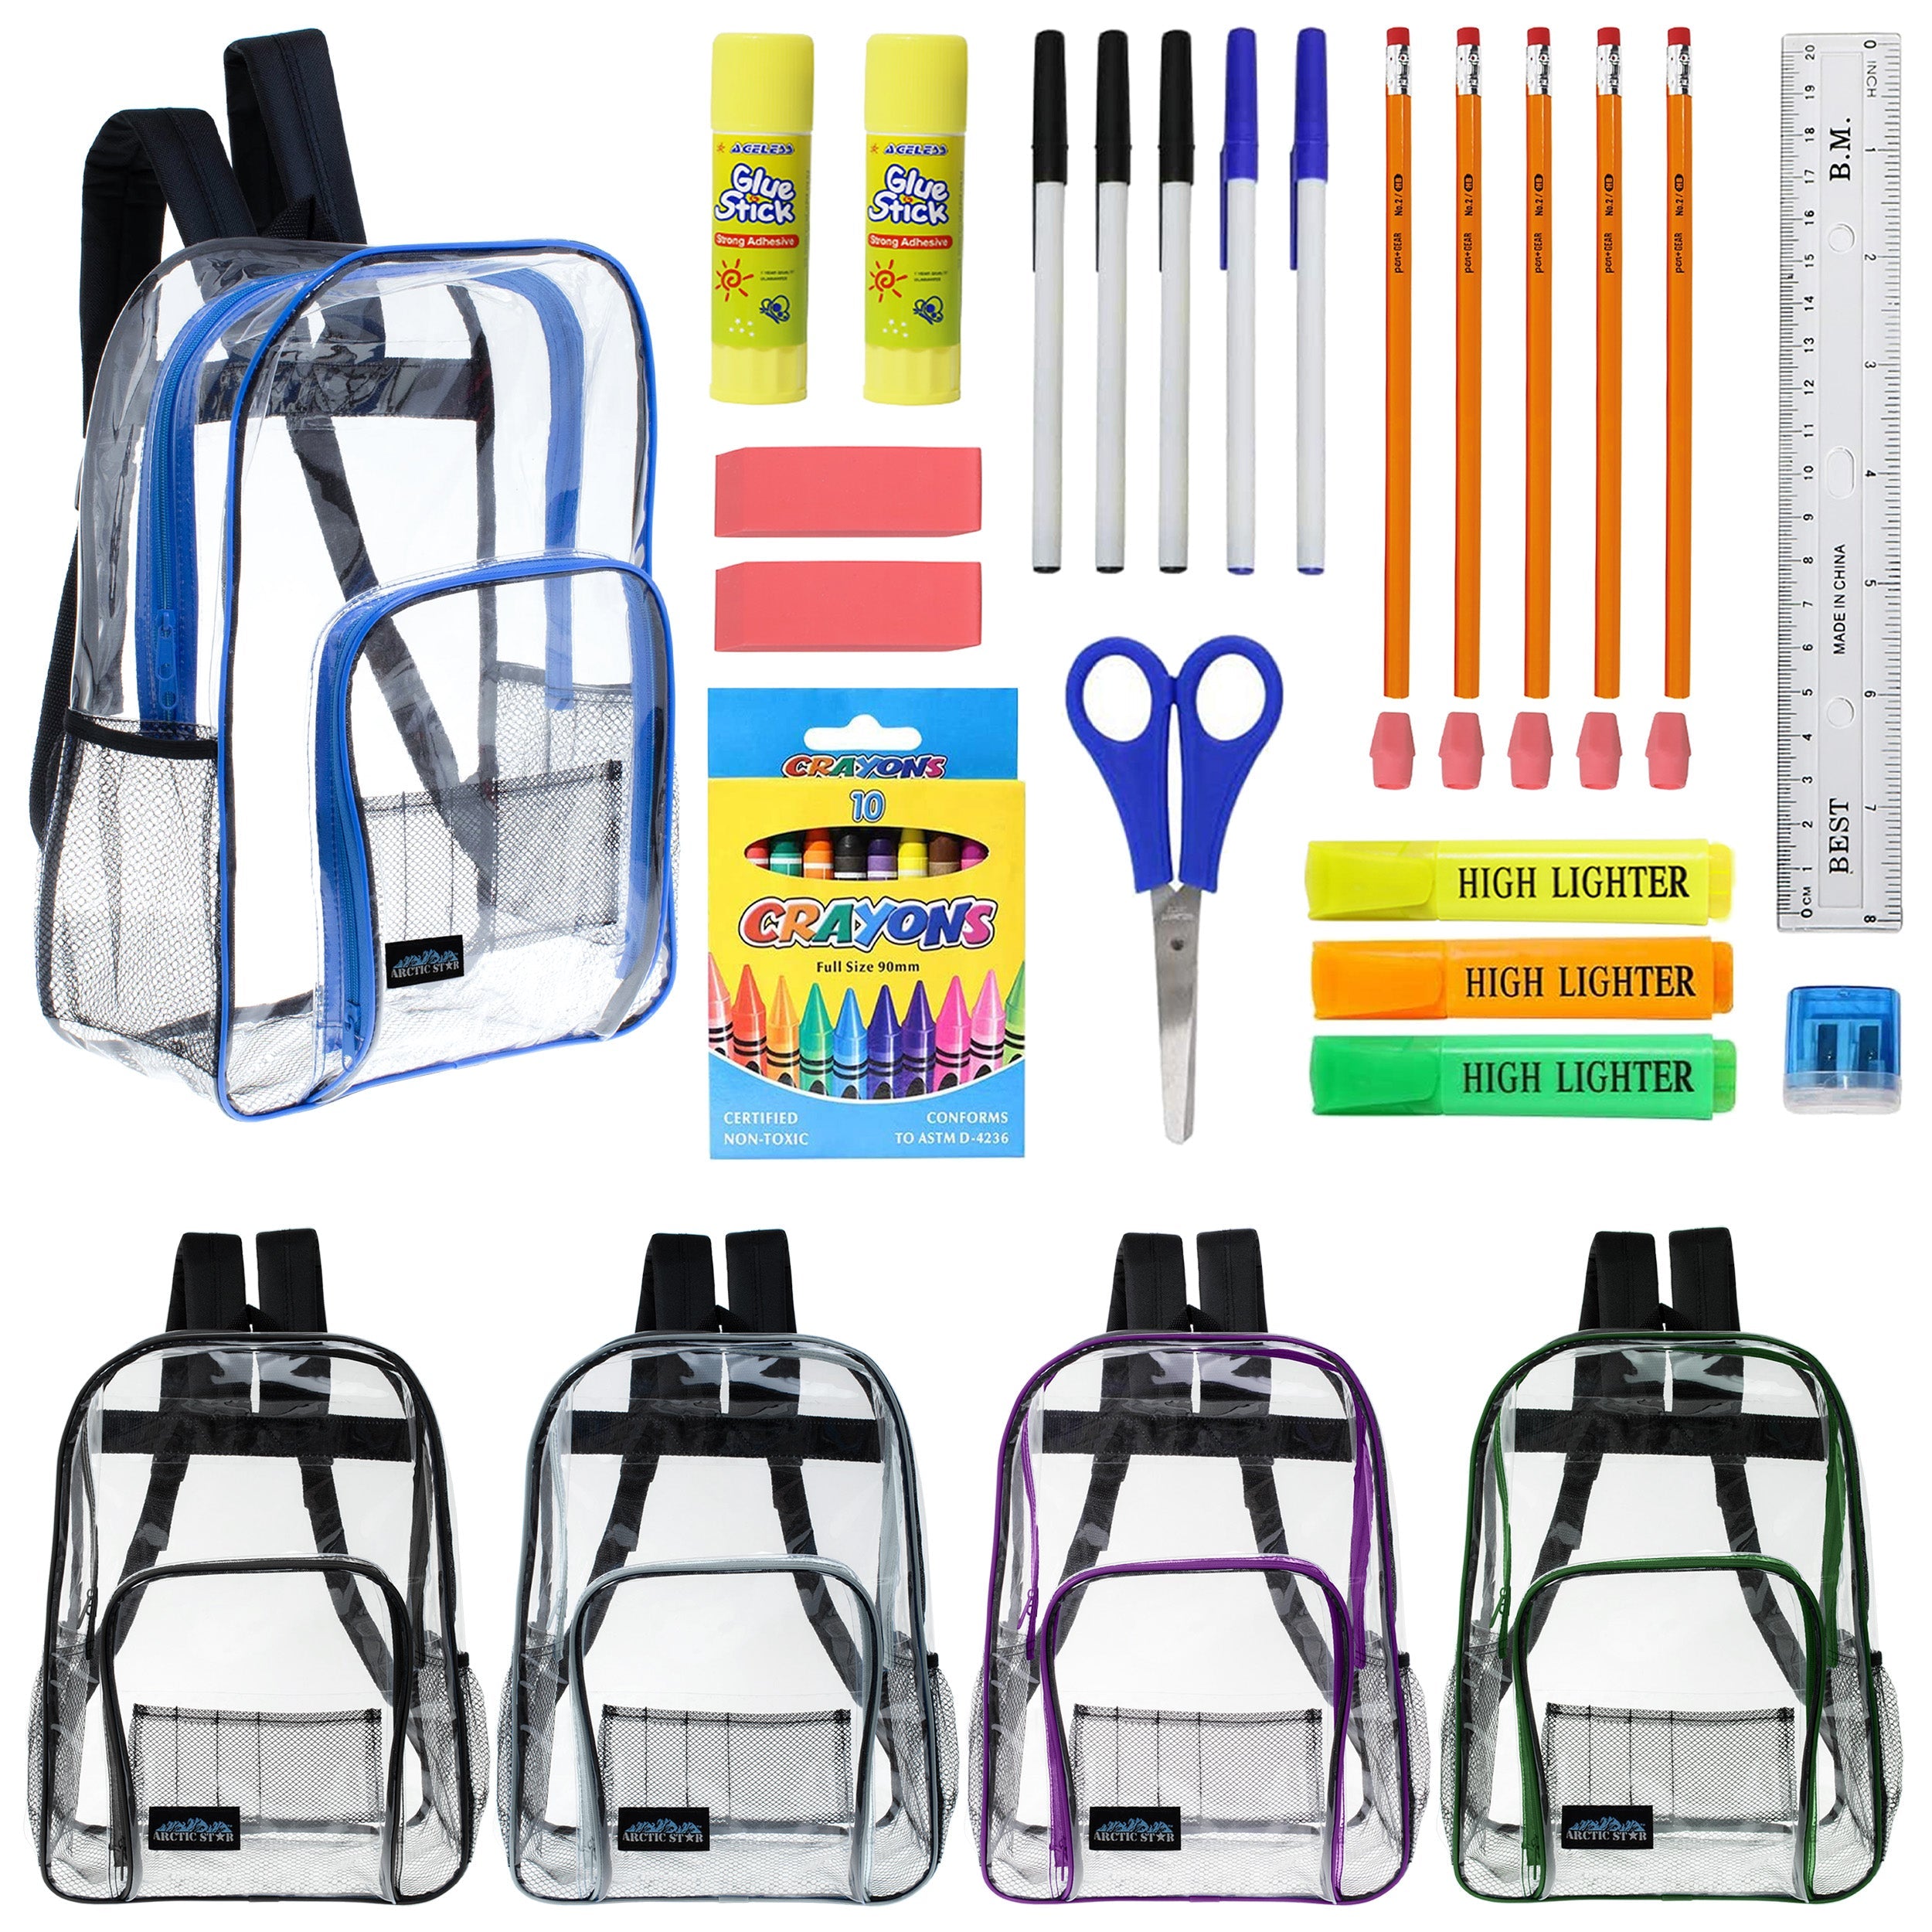 12 Wholesale 13" Clear Backpacks in Assorted Colors and 12 Bulk School Supply Kits of Your Choice